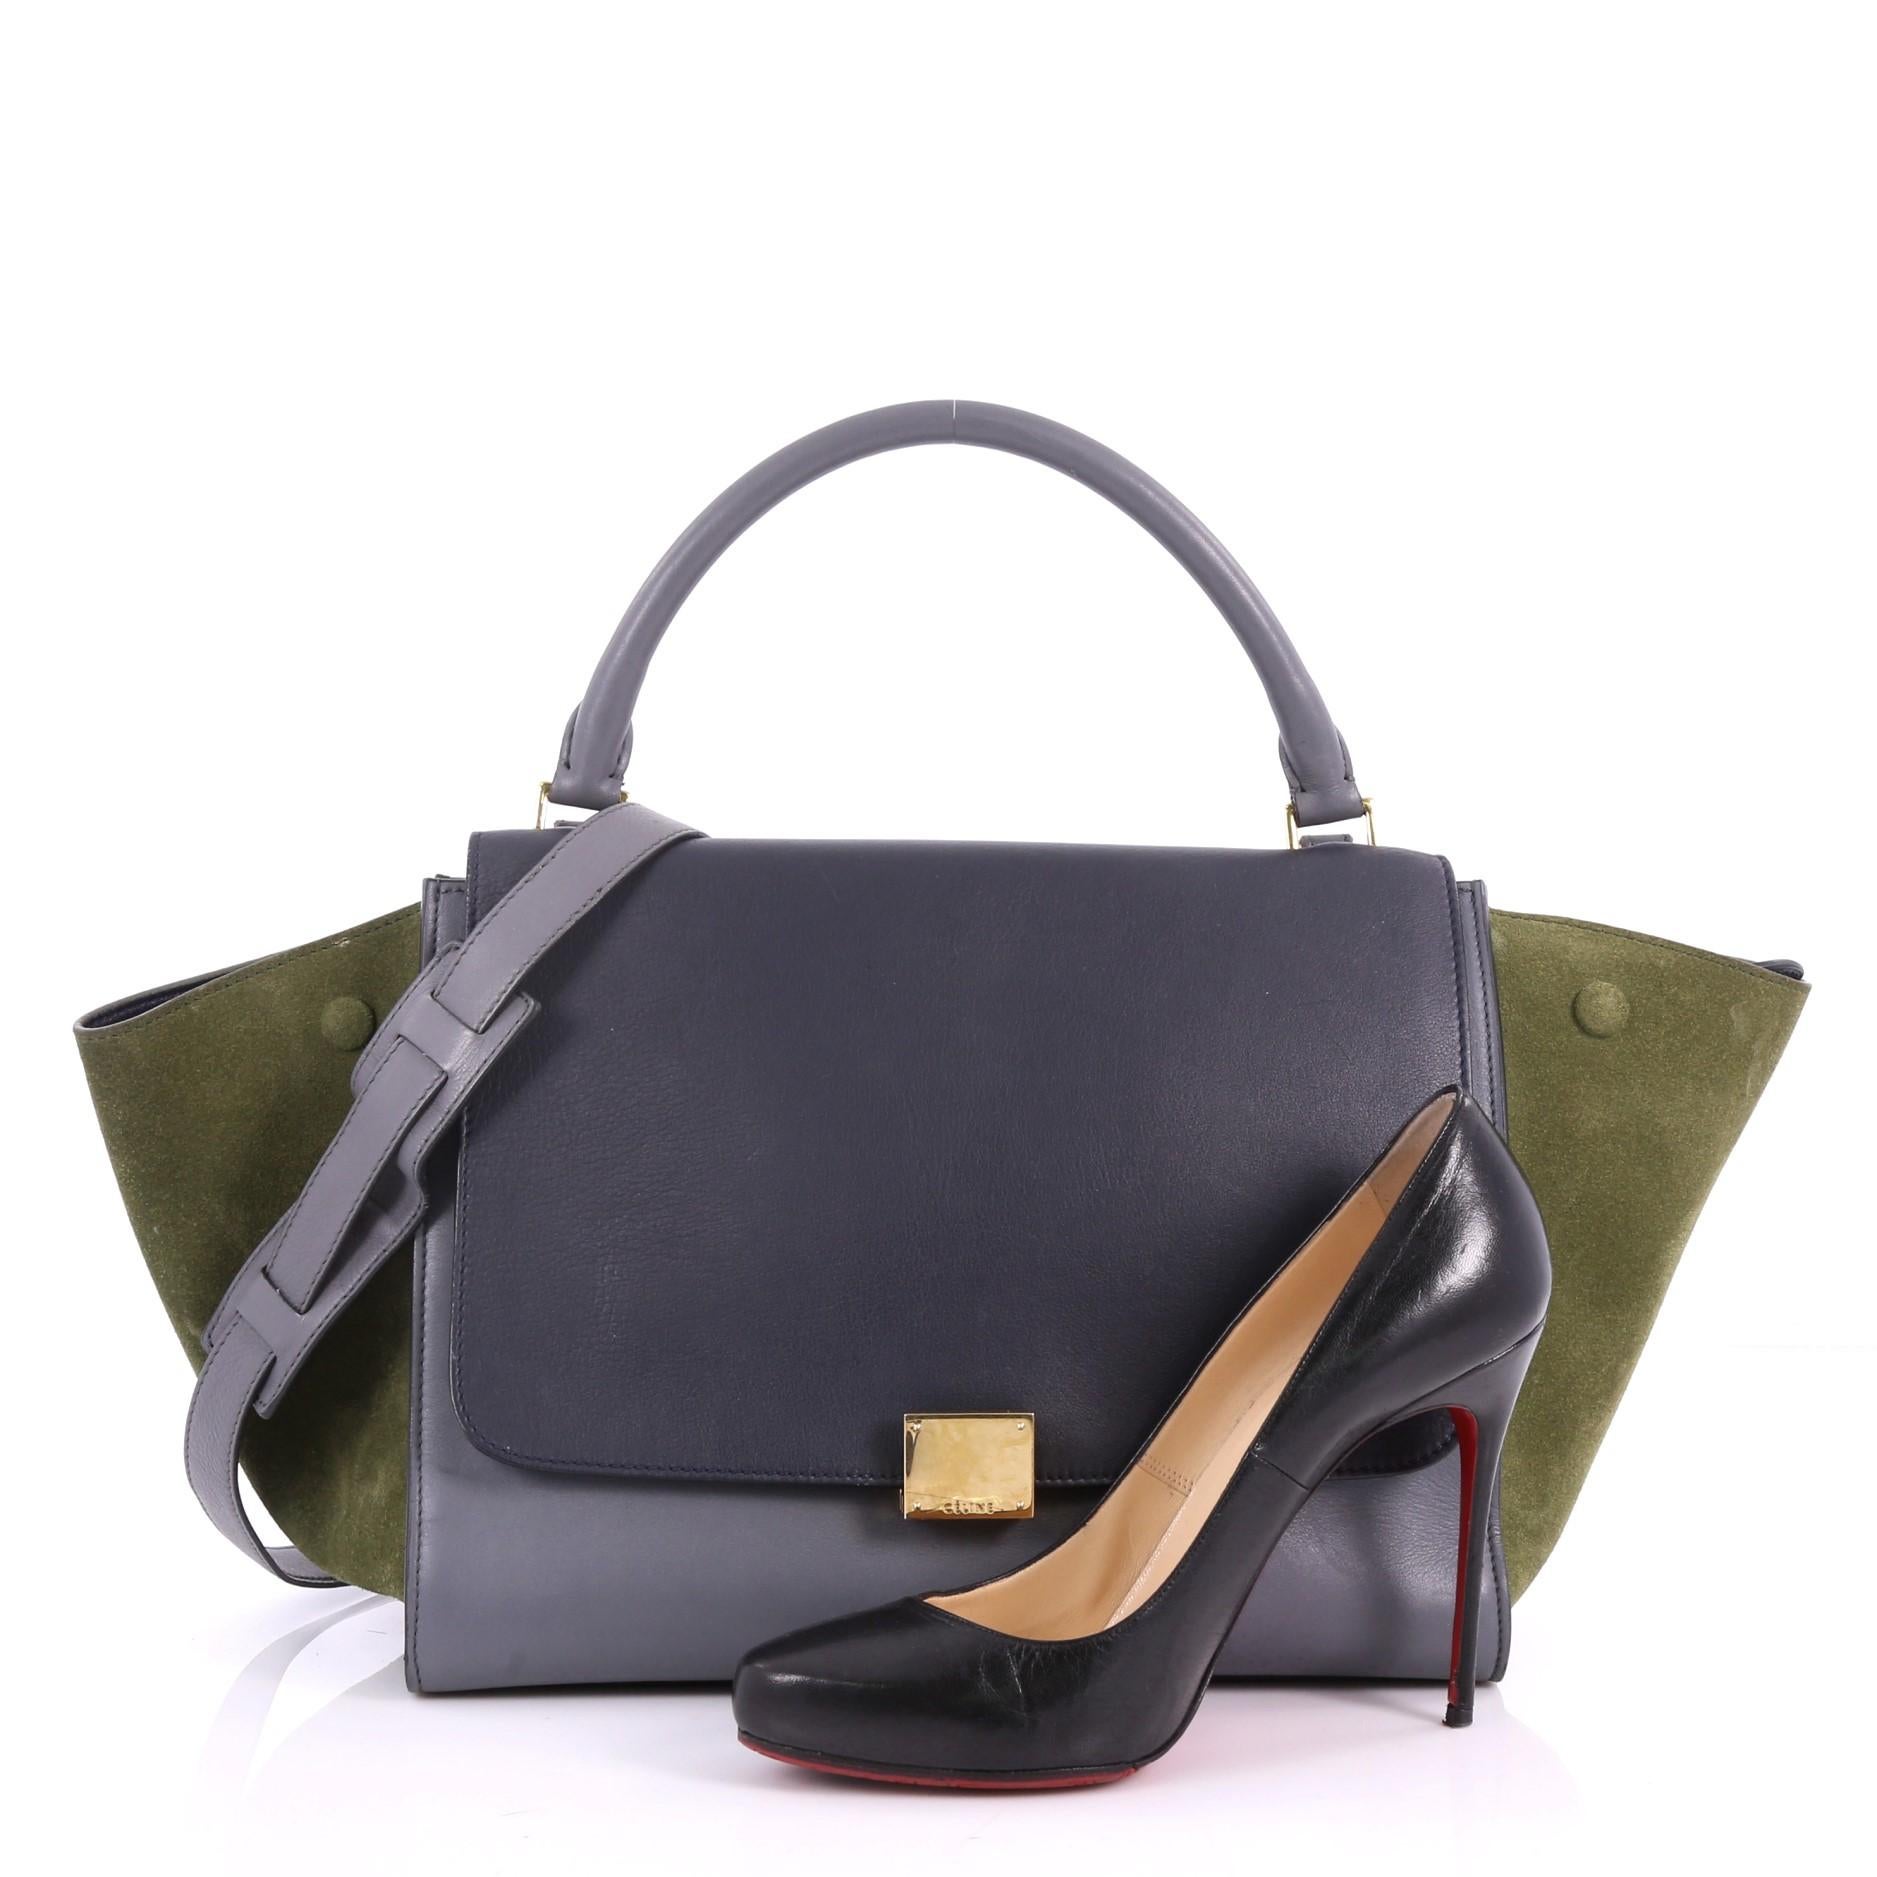 This authentic Celine Tricolor Trapeze Handbag Leather Medium is a modern minimalist design with a playful twist in an array of subdued colors. Crafted from grey leather and green side suede wings, this popular bag features gold-tone hardware